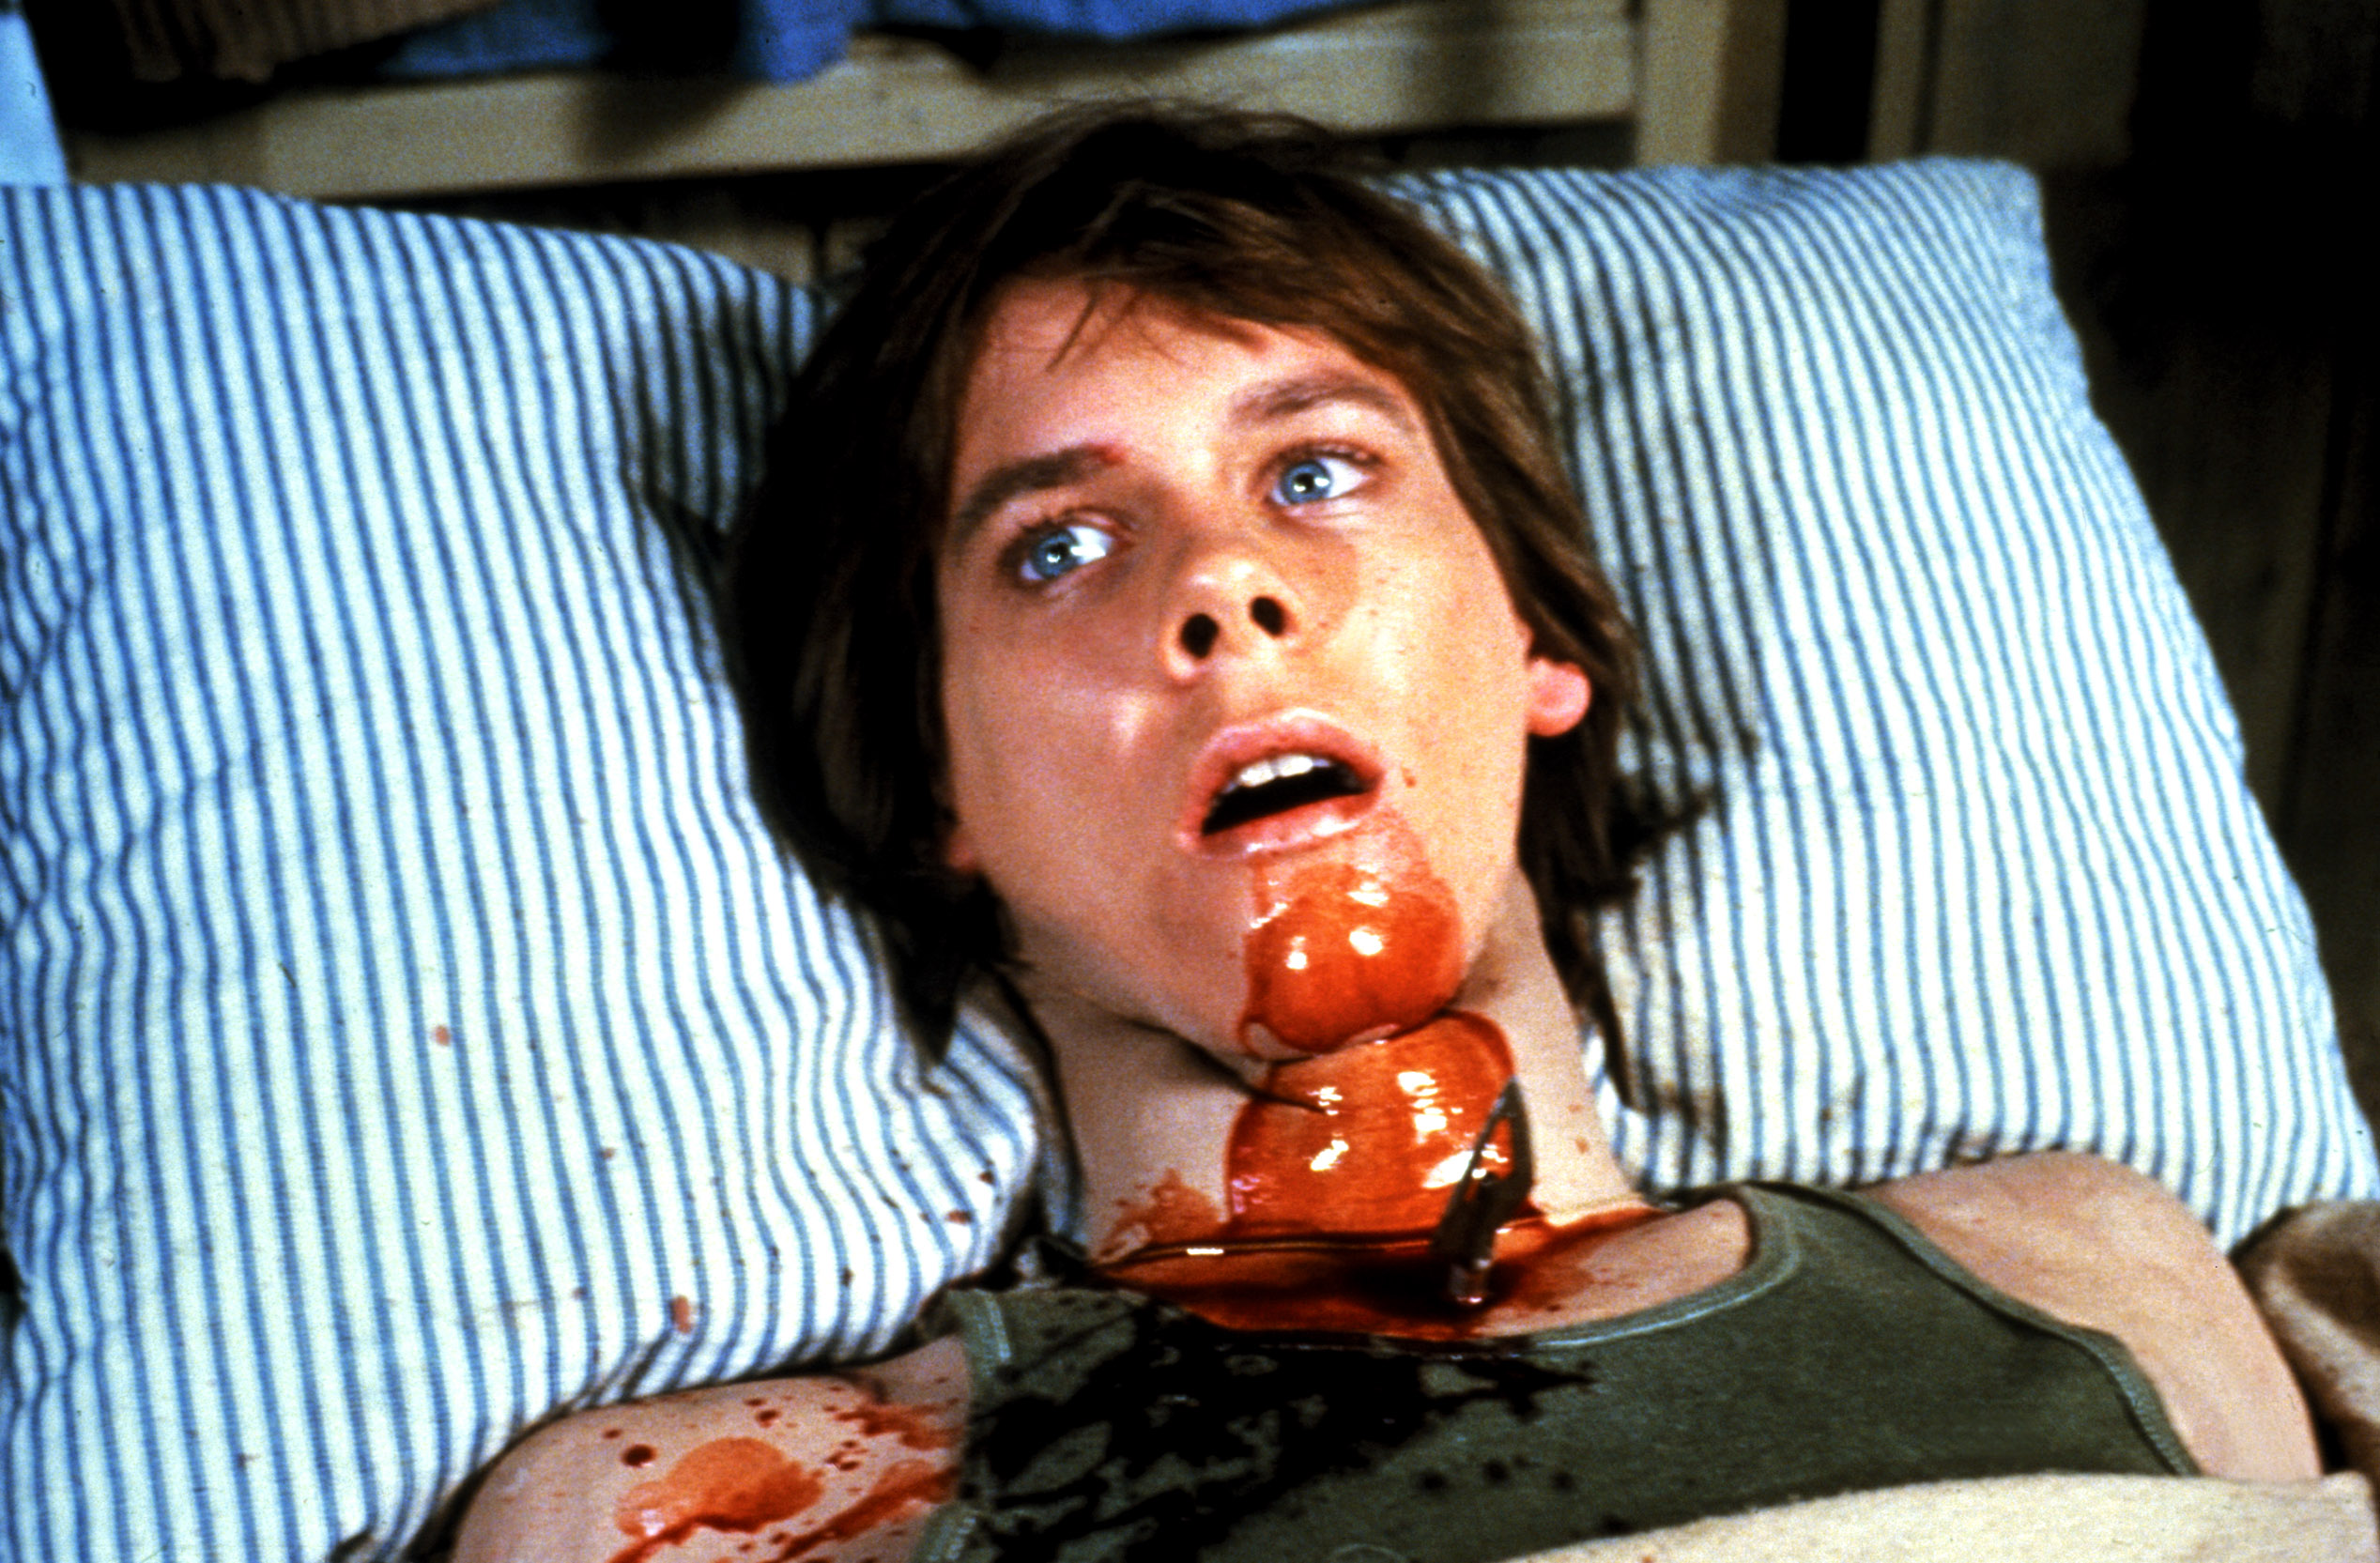 FRIDAY THE 13TH, Kevin Bacon, 1980, (c) Paramount/courtesy Everett Collection